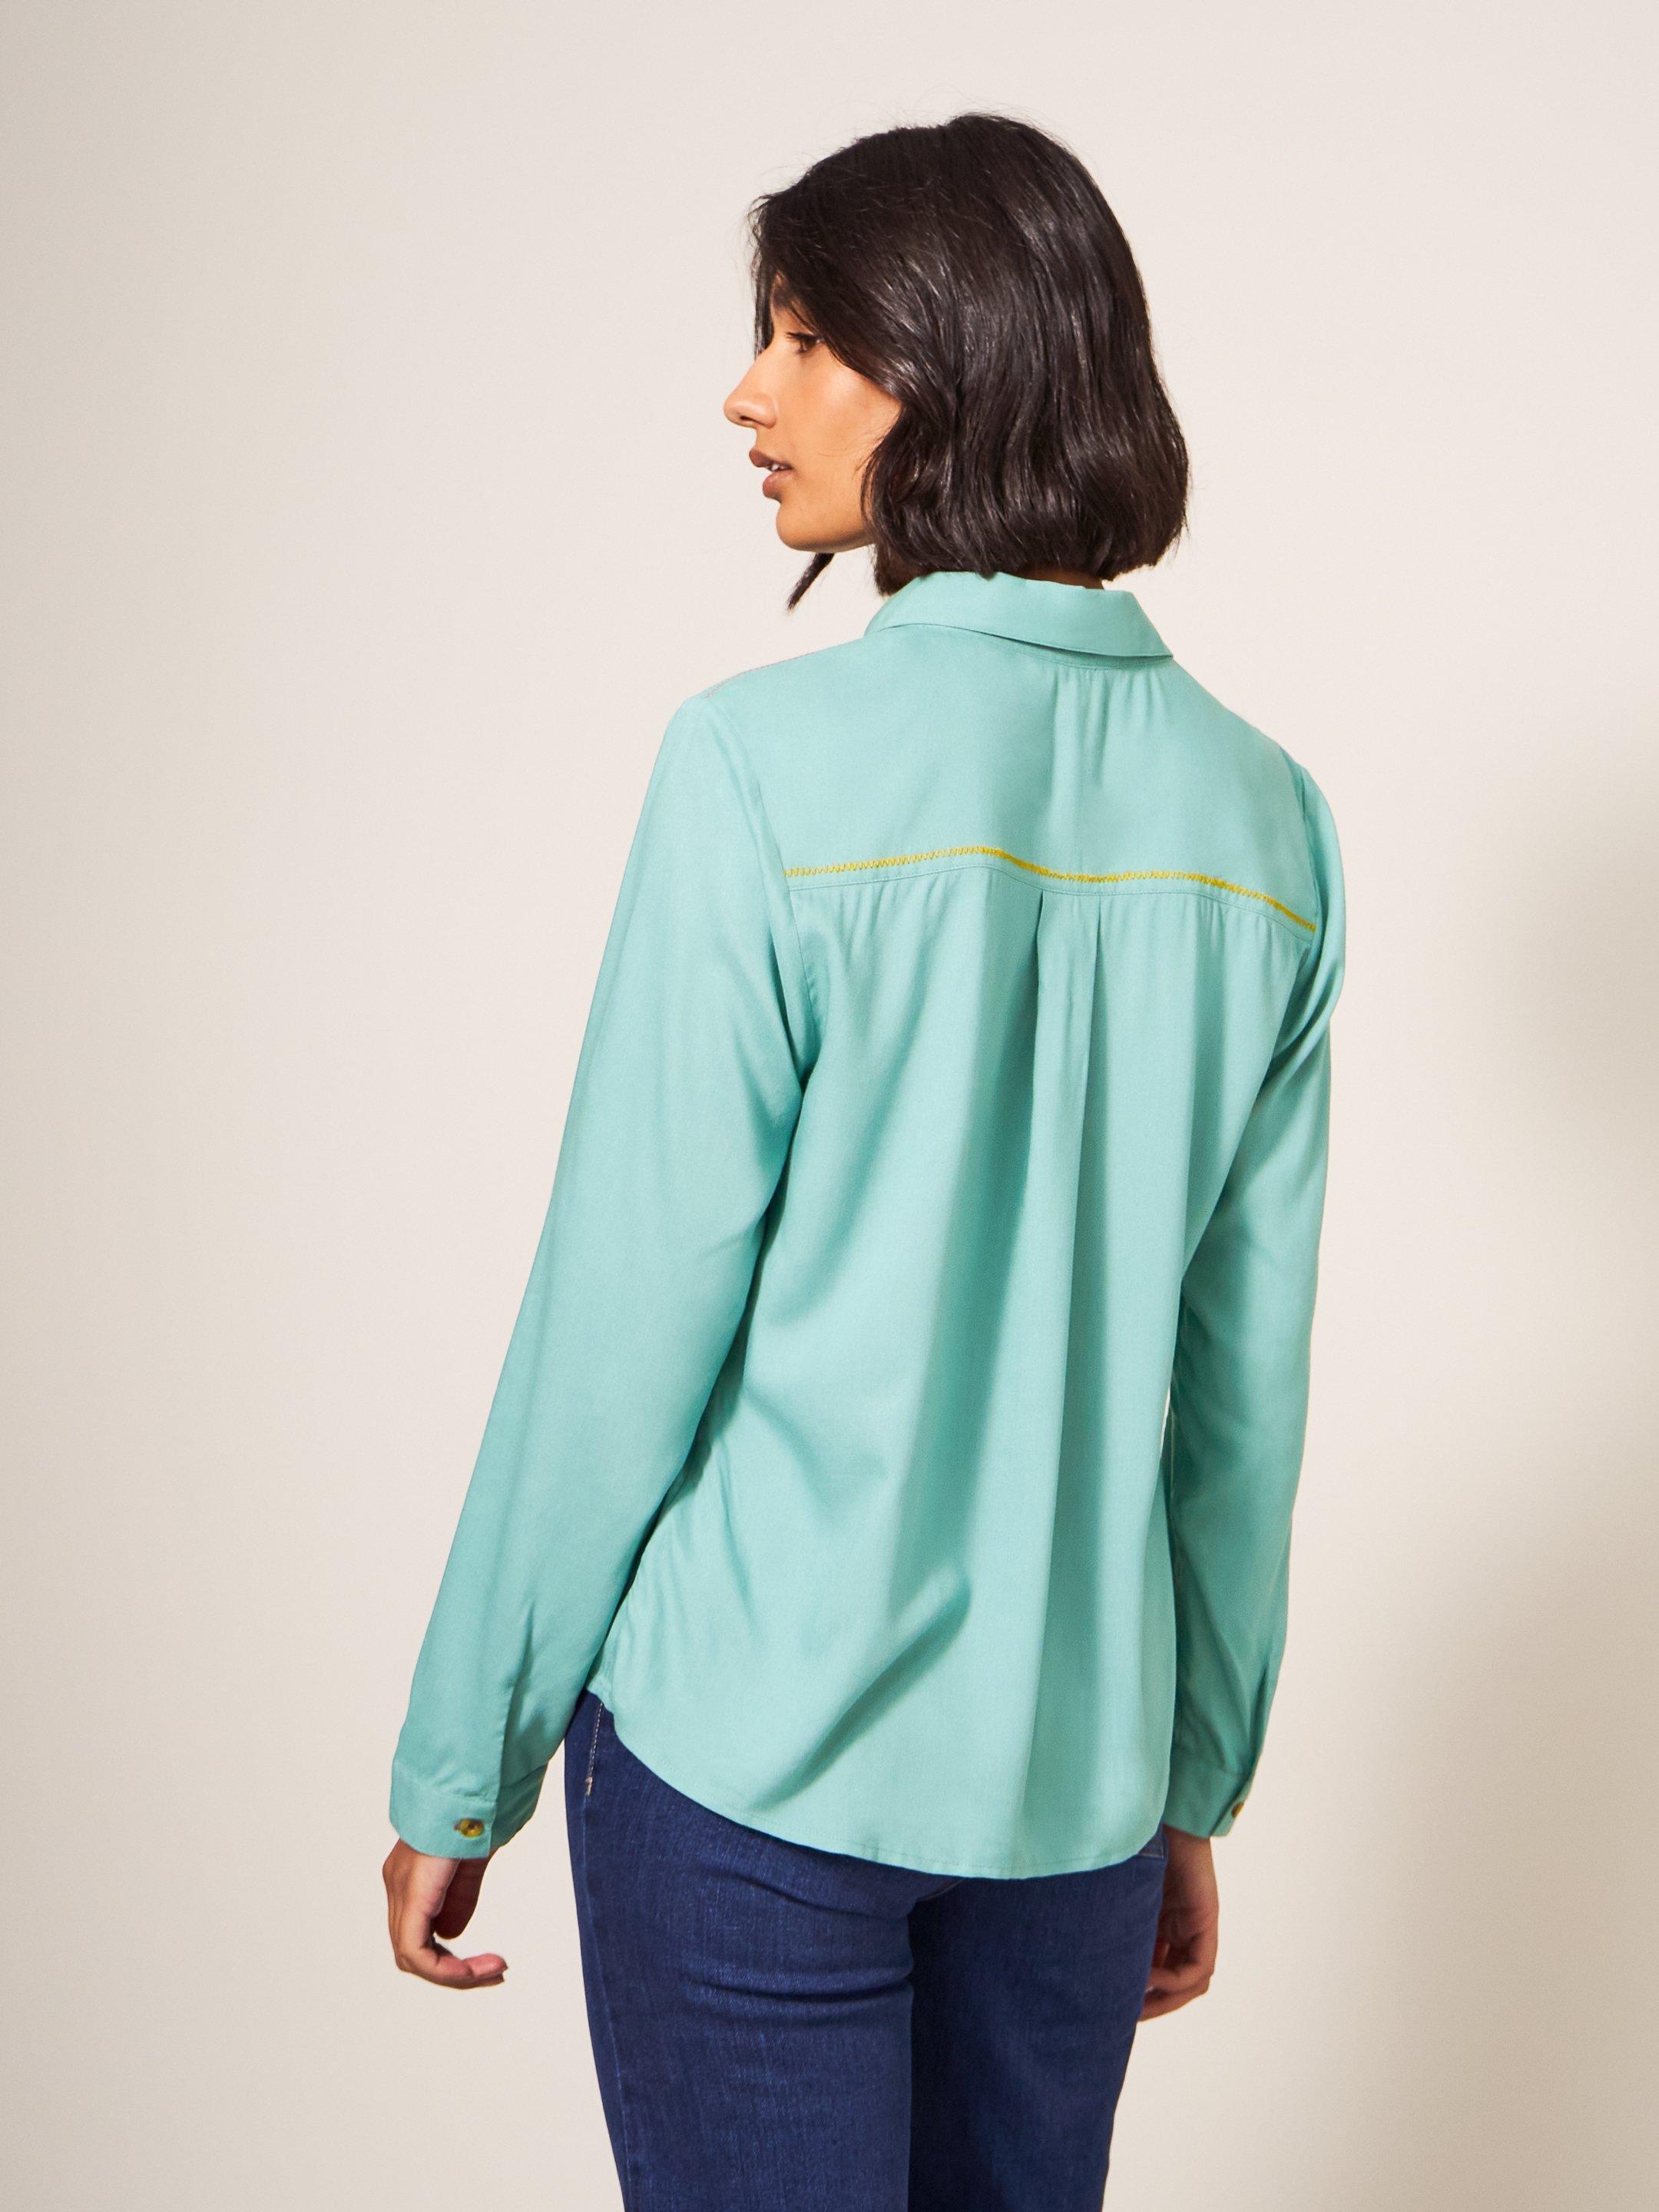 Maple Shirt in MID TEAL - MODEL BACK